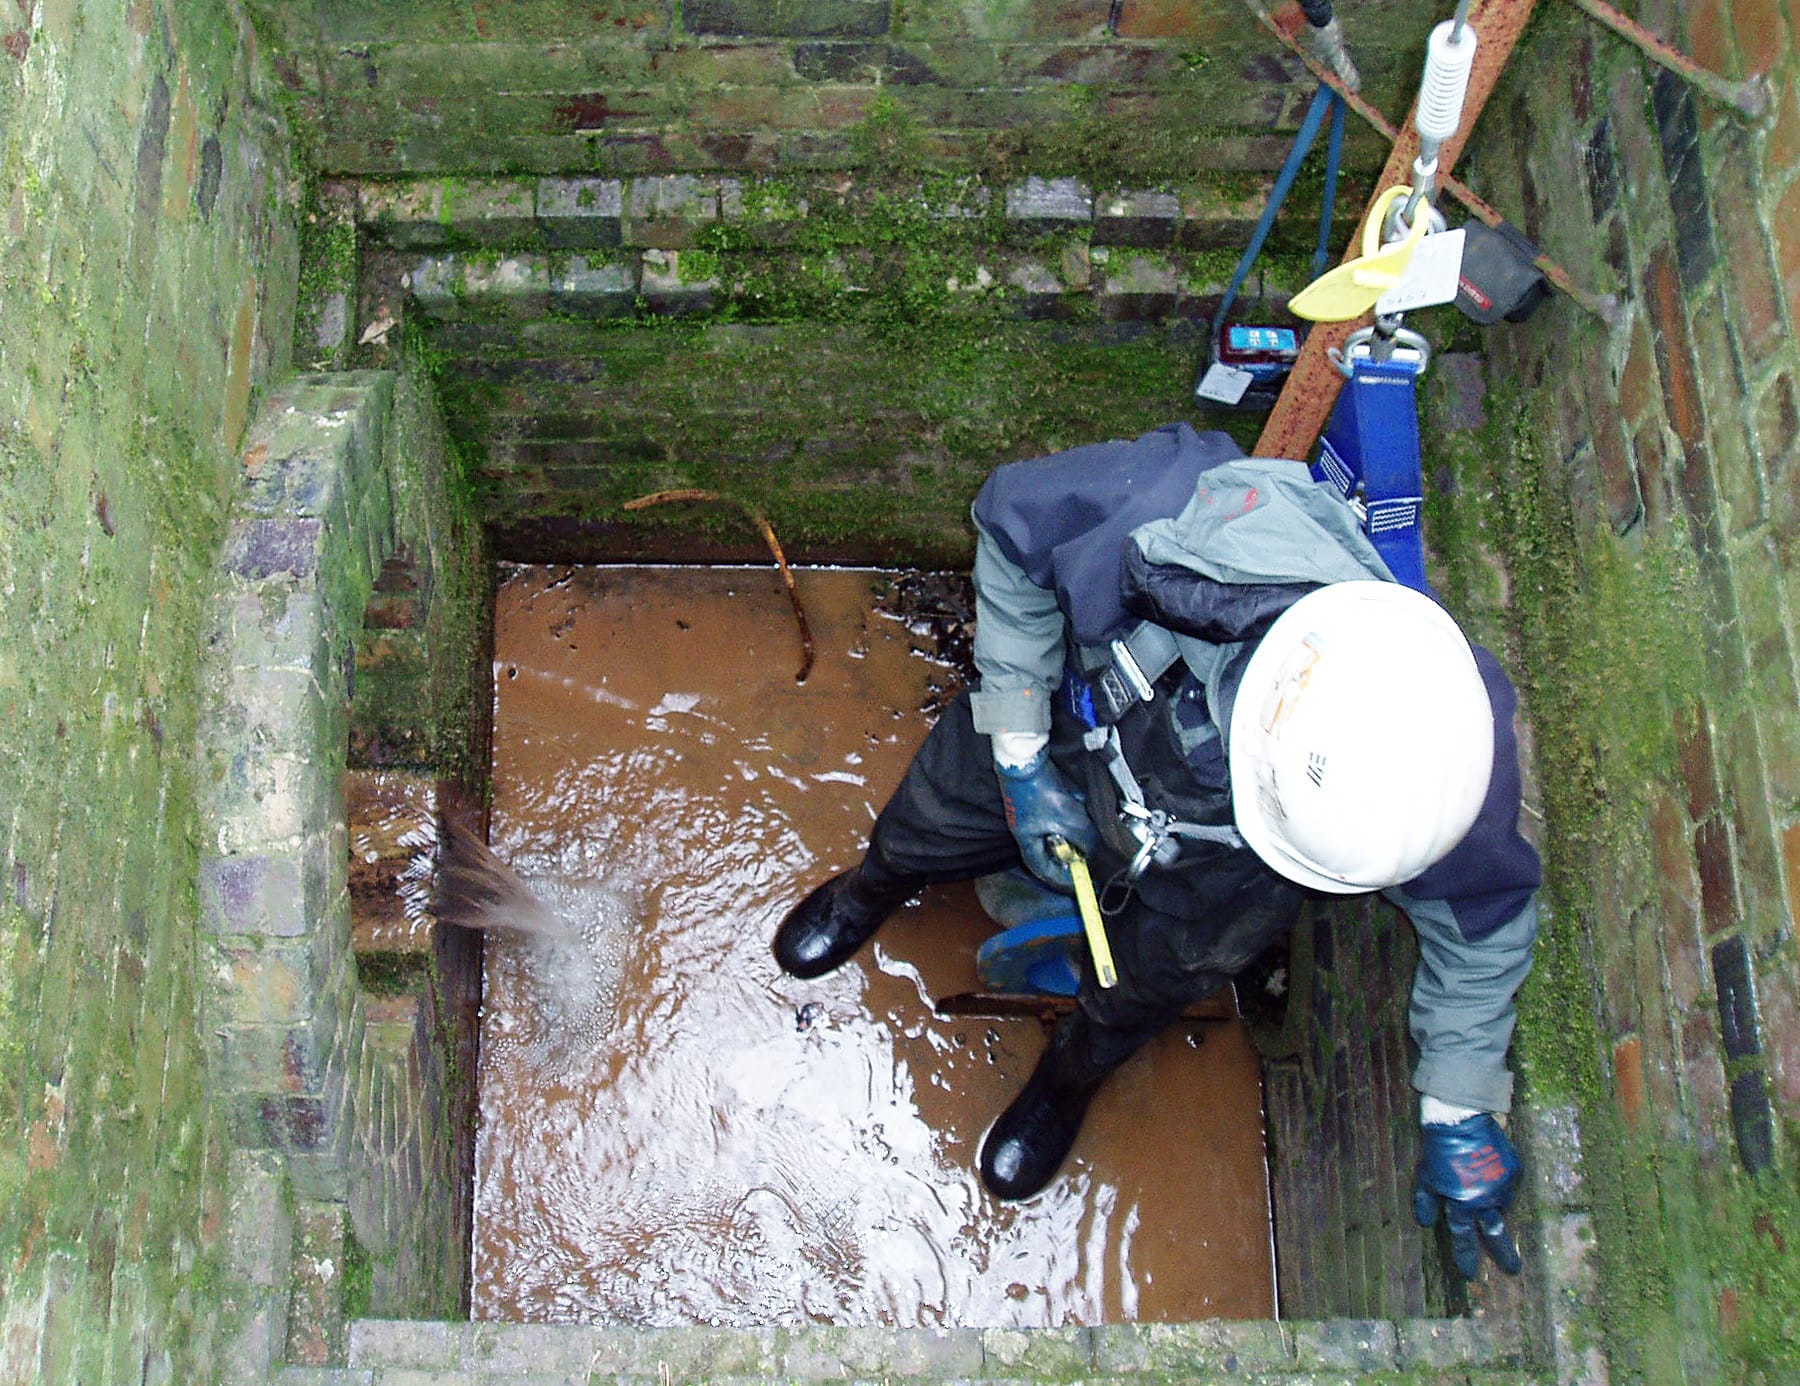 Culverts & deep tunnels - man being lowered into a sewer with rope access